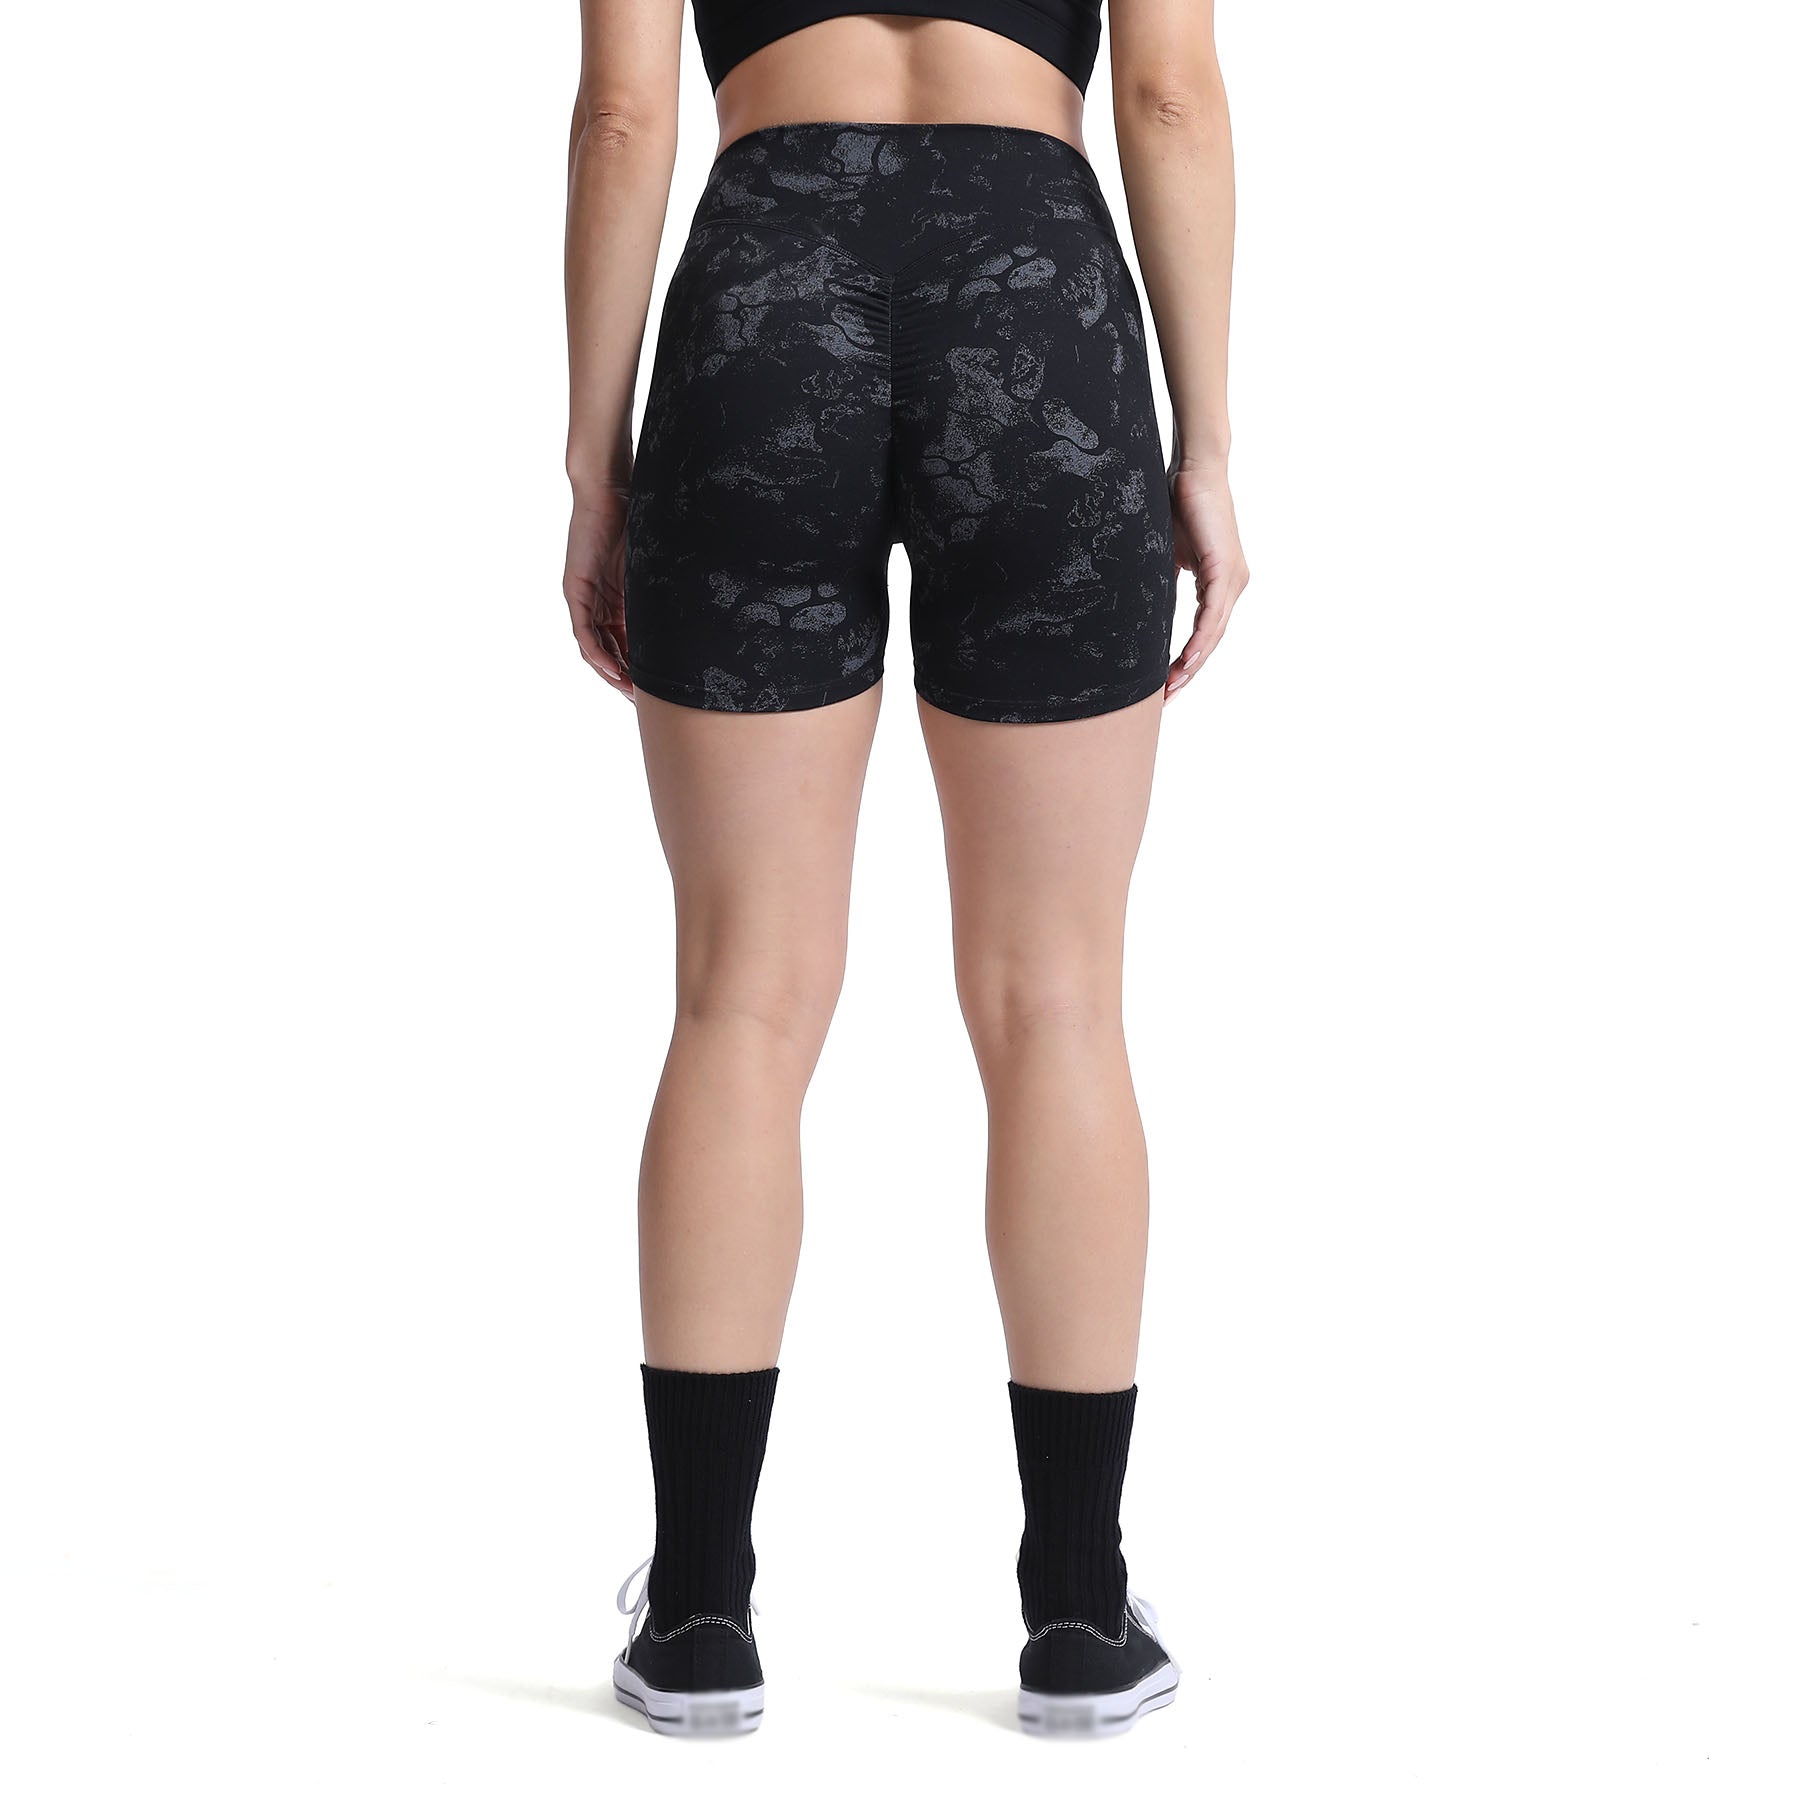 Aoxjox High-Low Scrunch Shorts